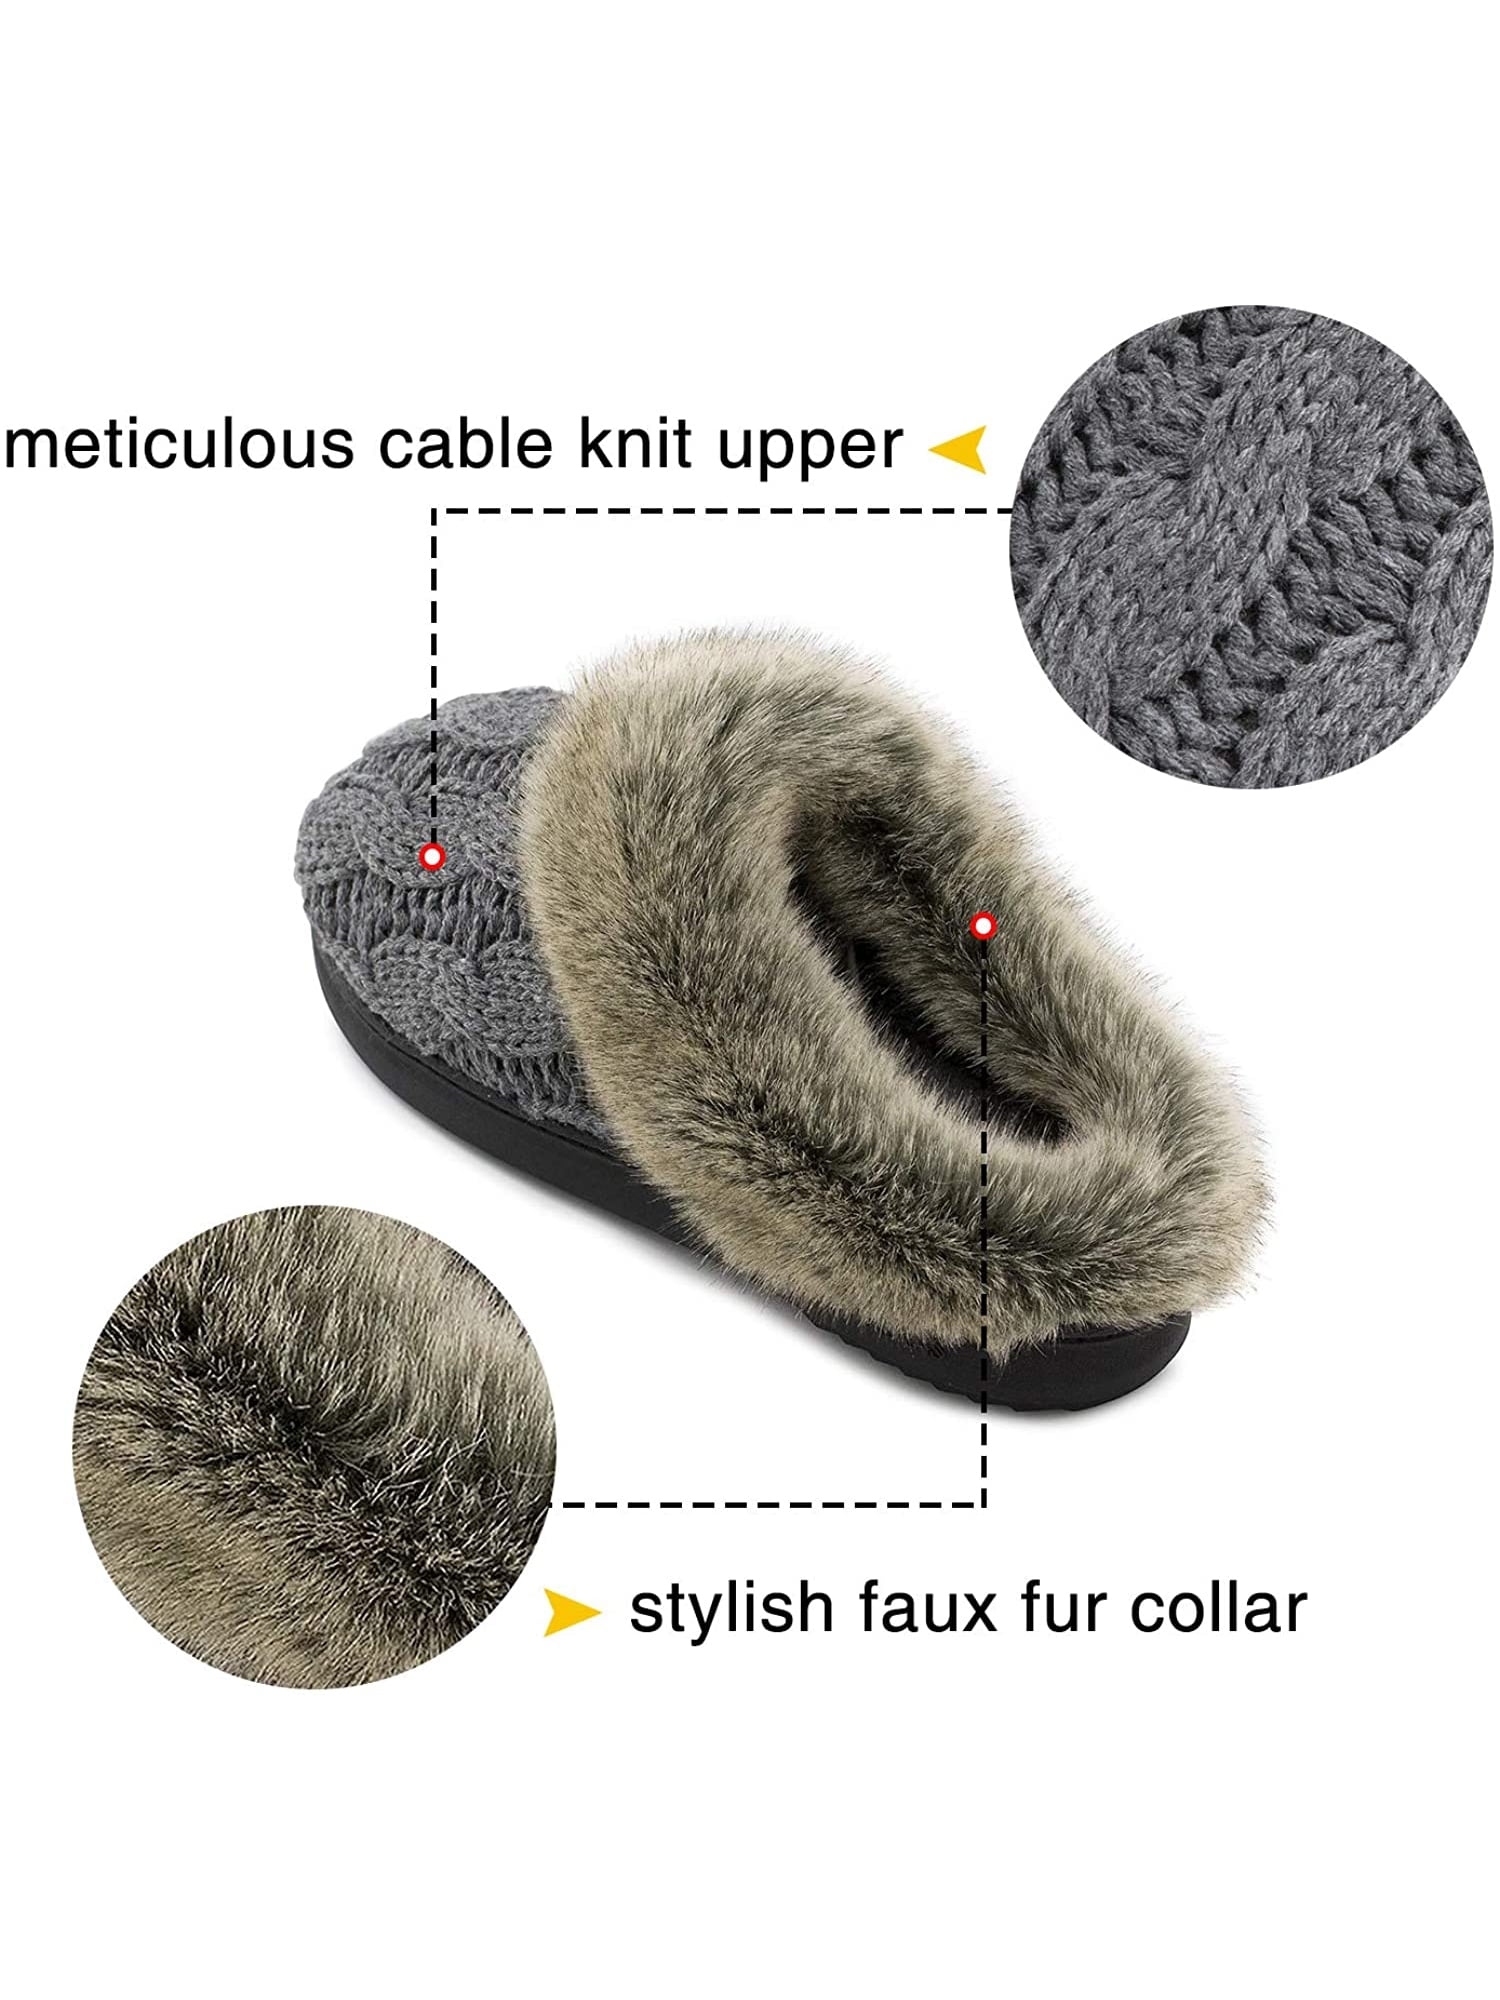 ULTRAIDEAS Womens Yarn Cable Knit Slippers Memory Foam Anti-Skid Indoor//Outdoor House Shoes w//Faux Fur Collar